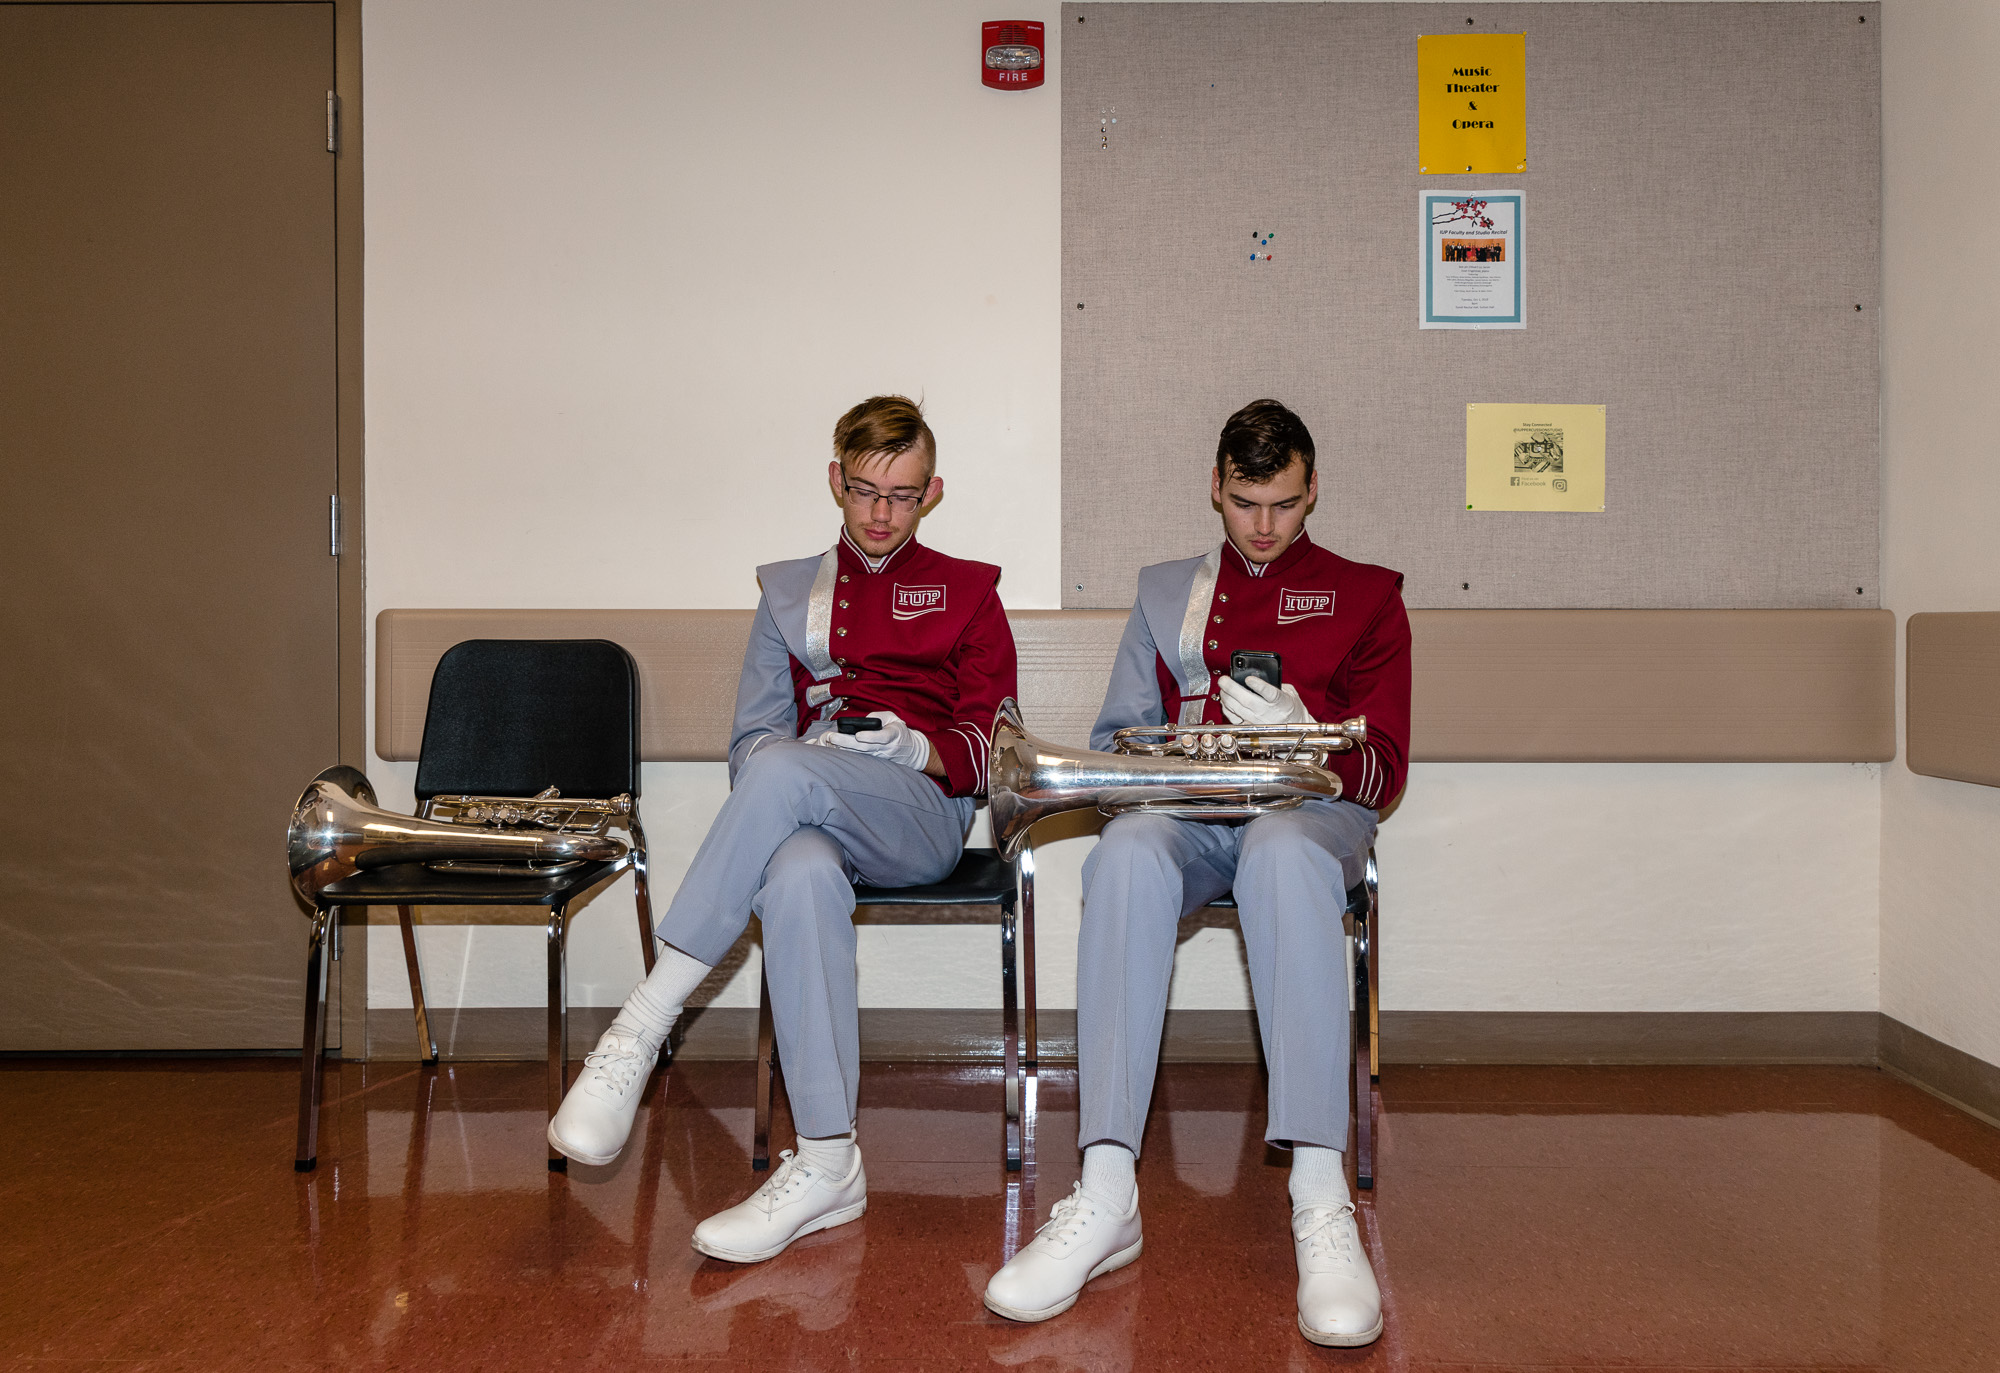 Members of the IUP marching band look at their personal electronic devices during their break.